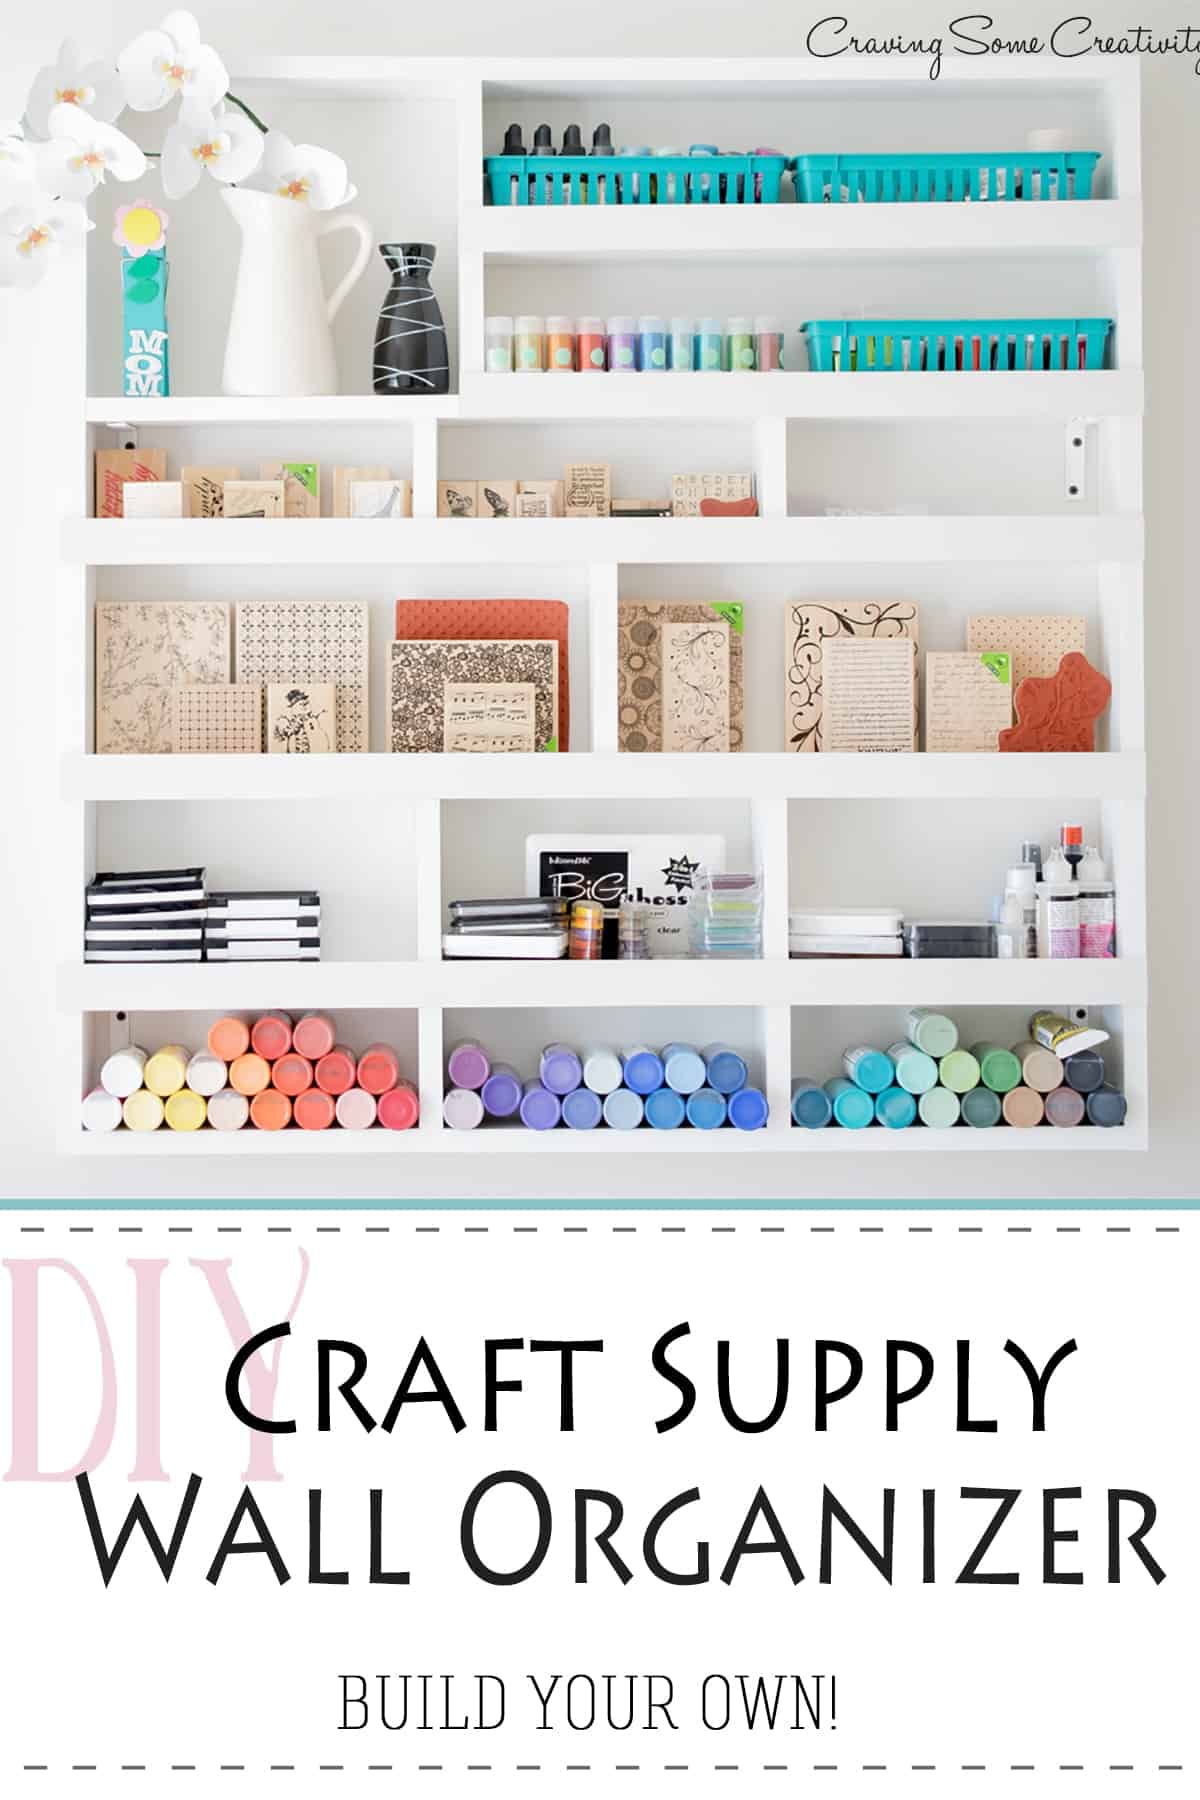 Craft Supply Storage and Organization on the wall - pretty DIY organizer that you can build yourself!